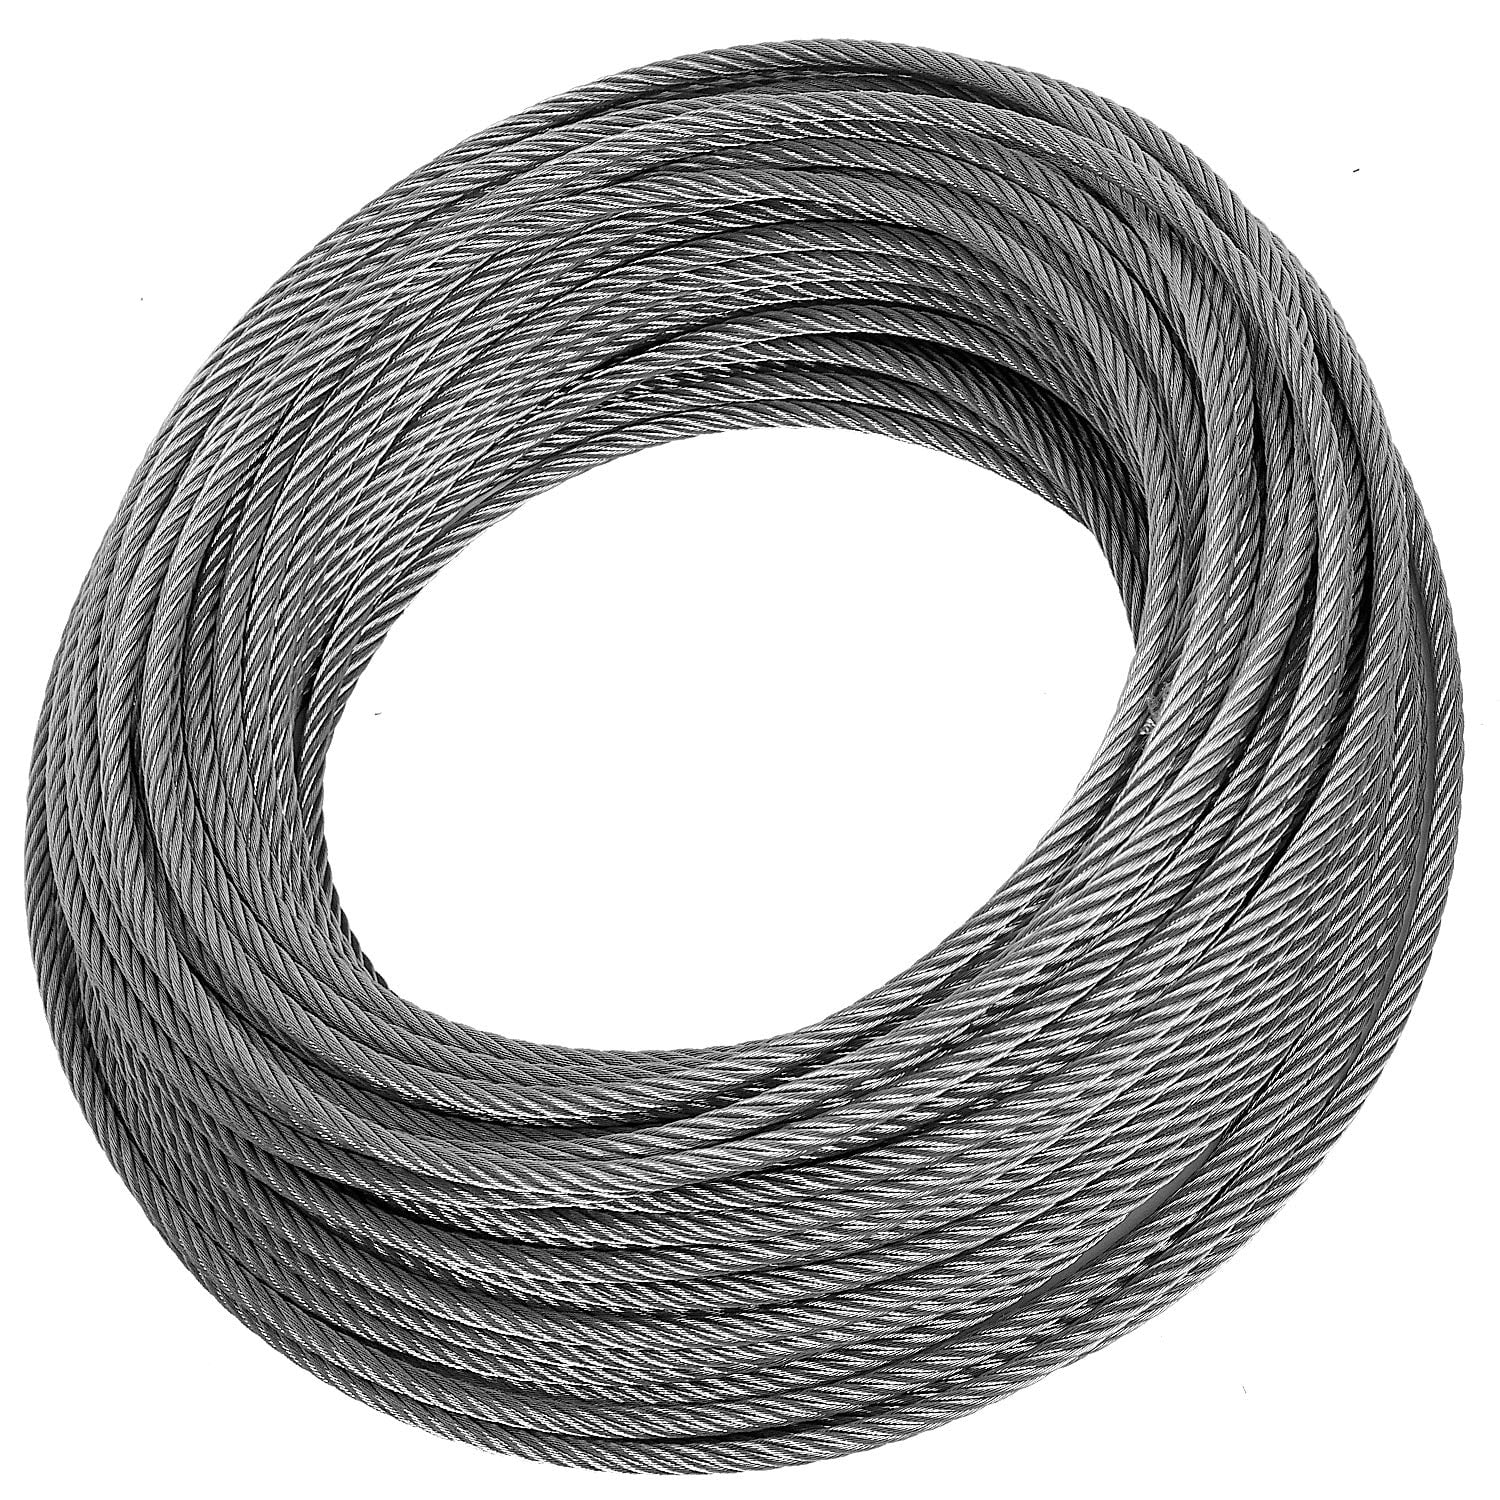 25 feet 1/4 Inch Galvanized Steel Cable 7 X 19 GAC Pre Cut OR By the foot 